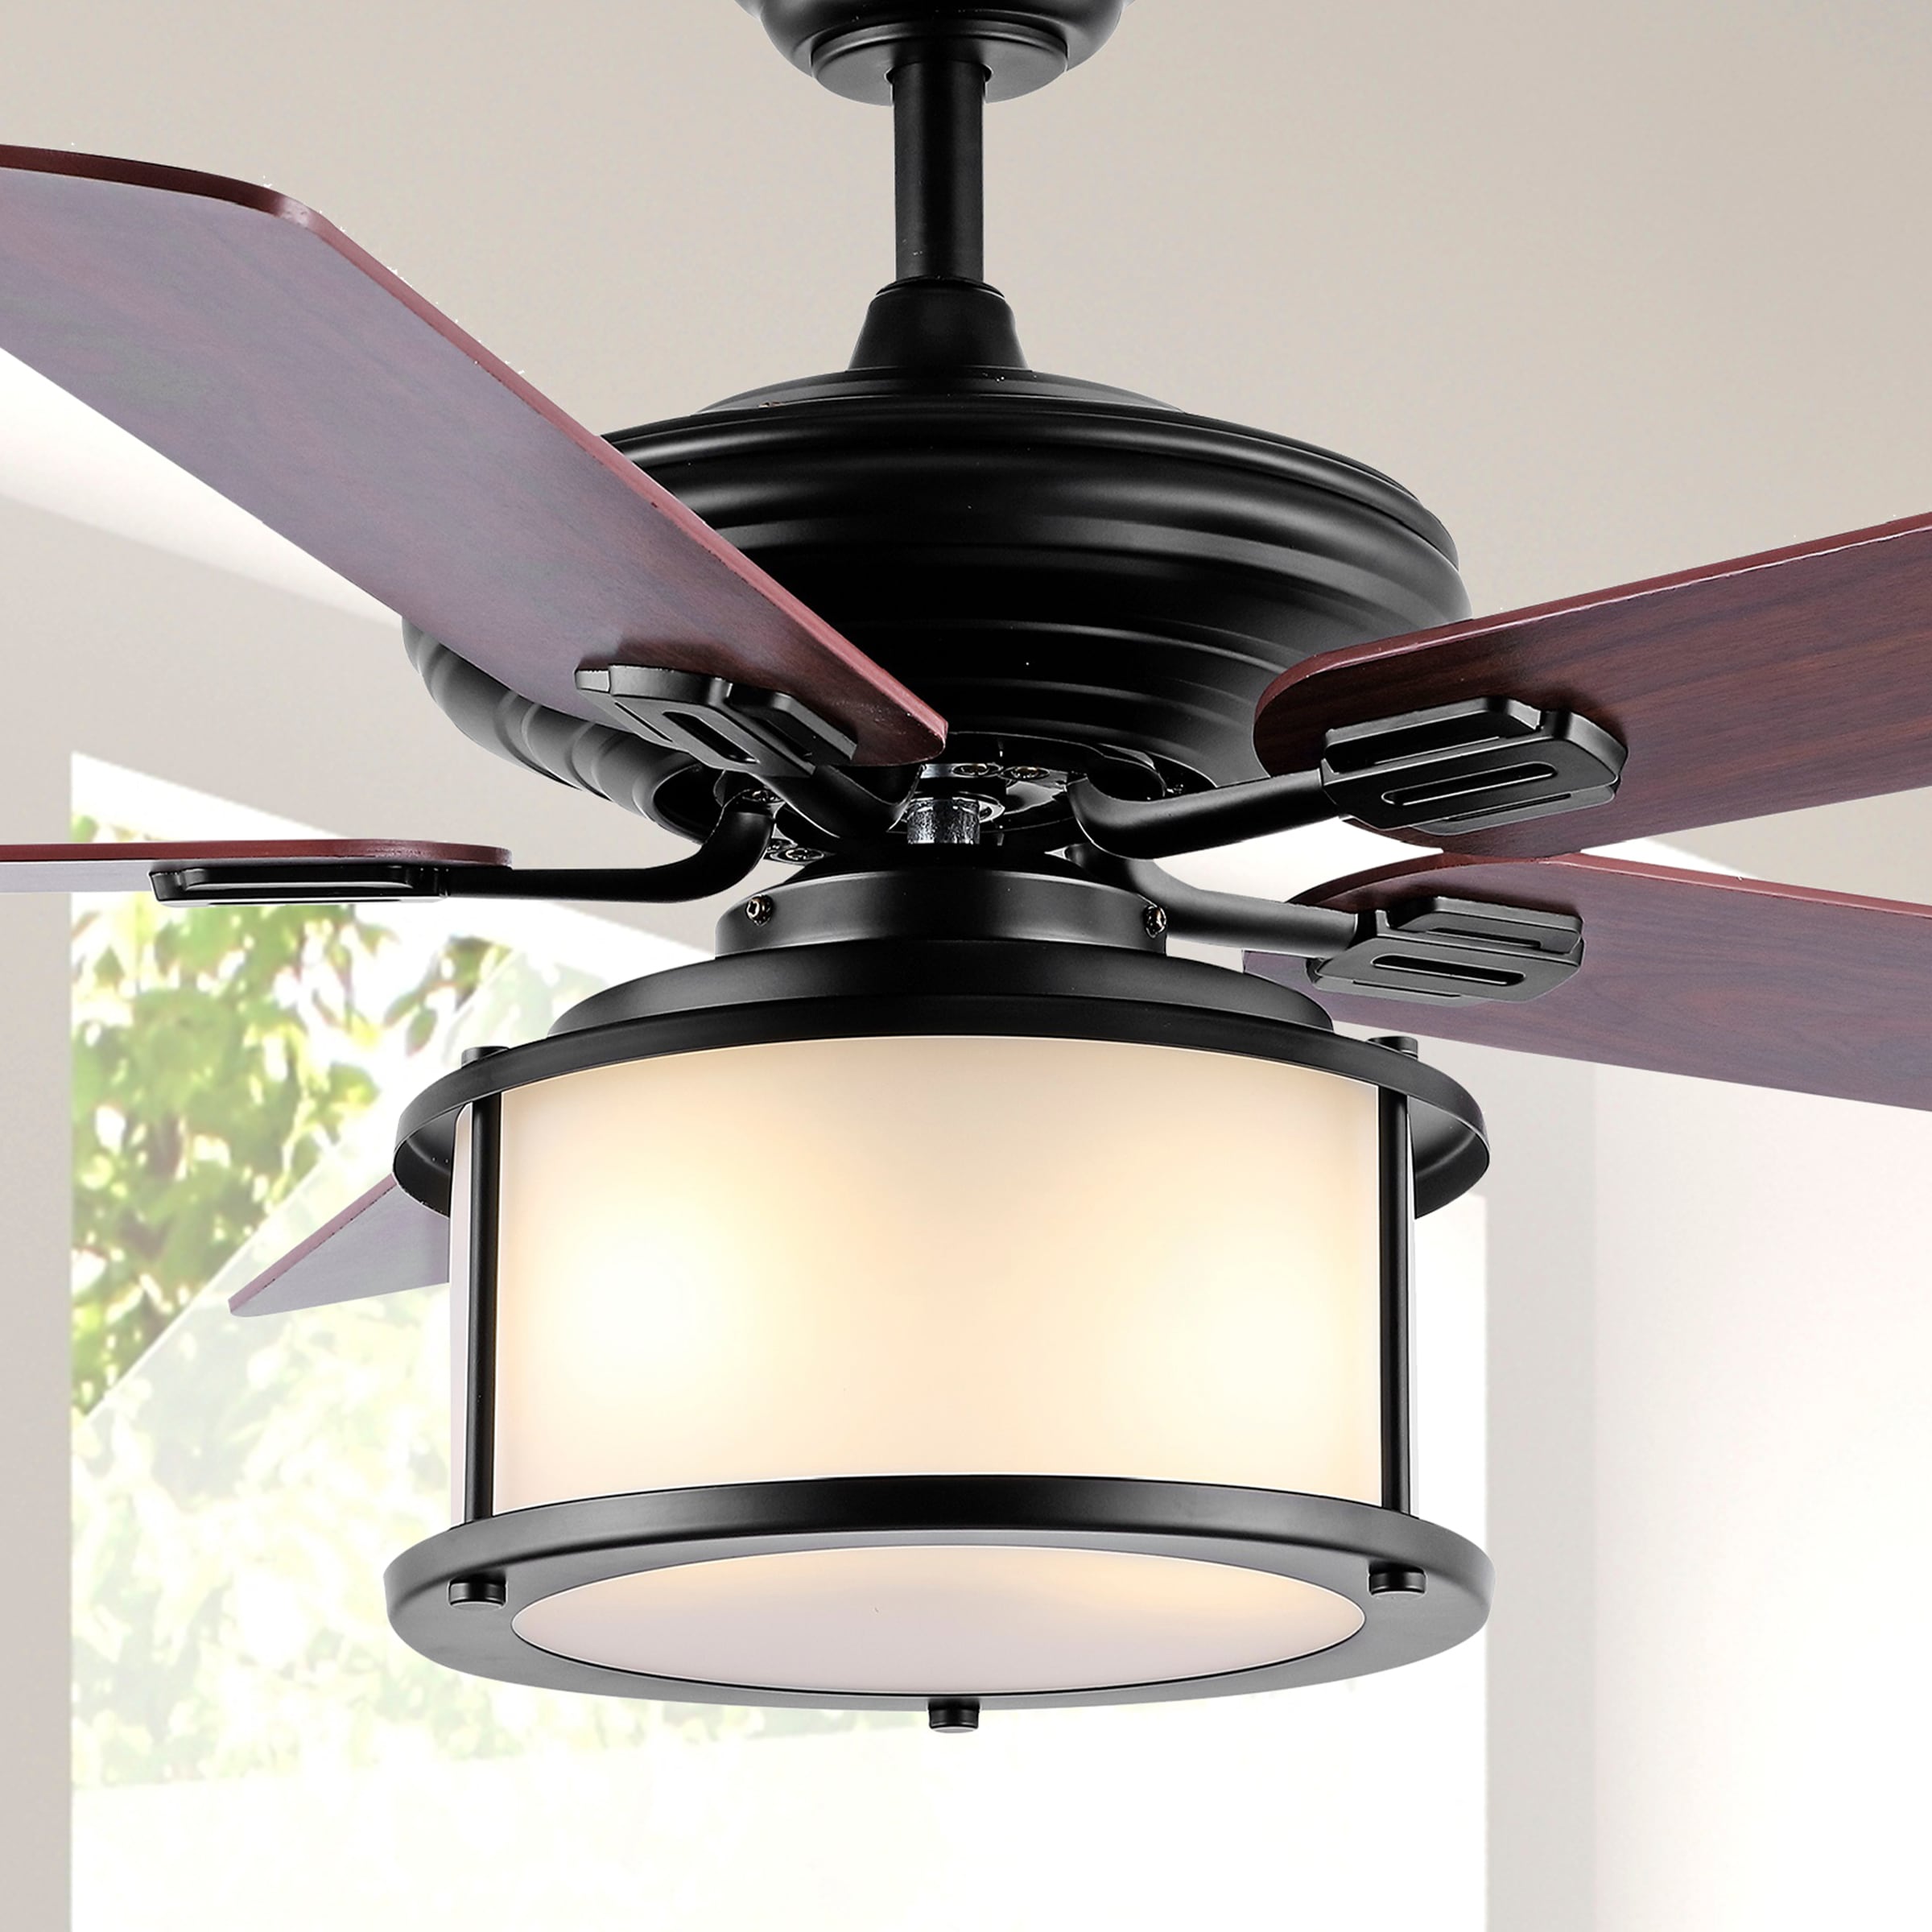 Outdoor/Indoor 52" Patio Ceiling Fan Remote Transitional Light Industrial Cool 